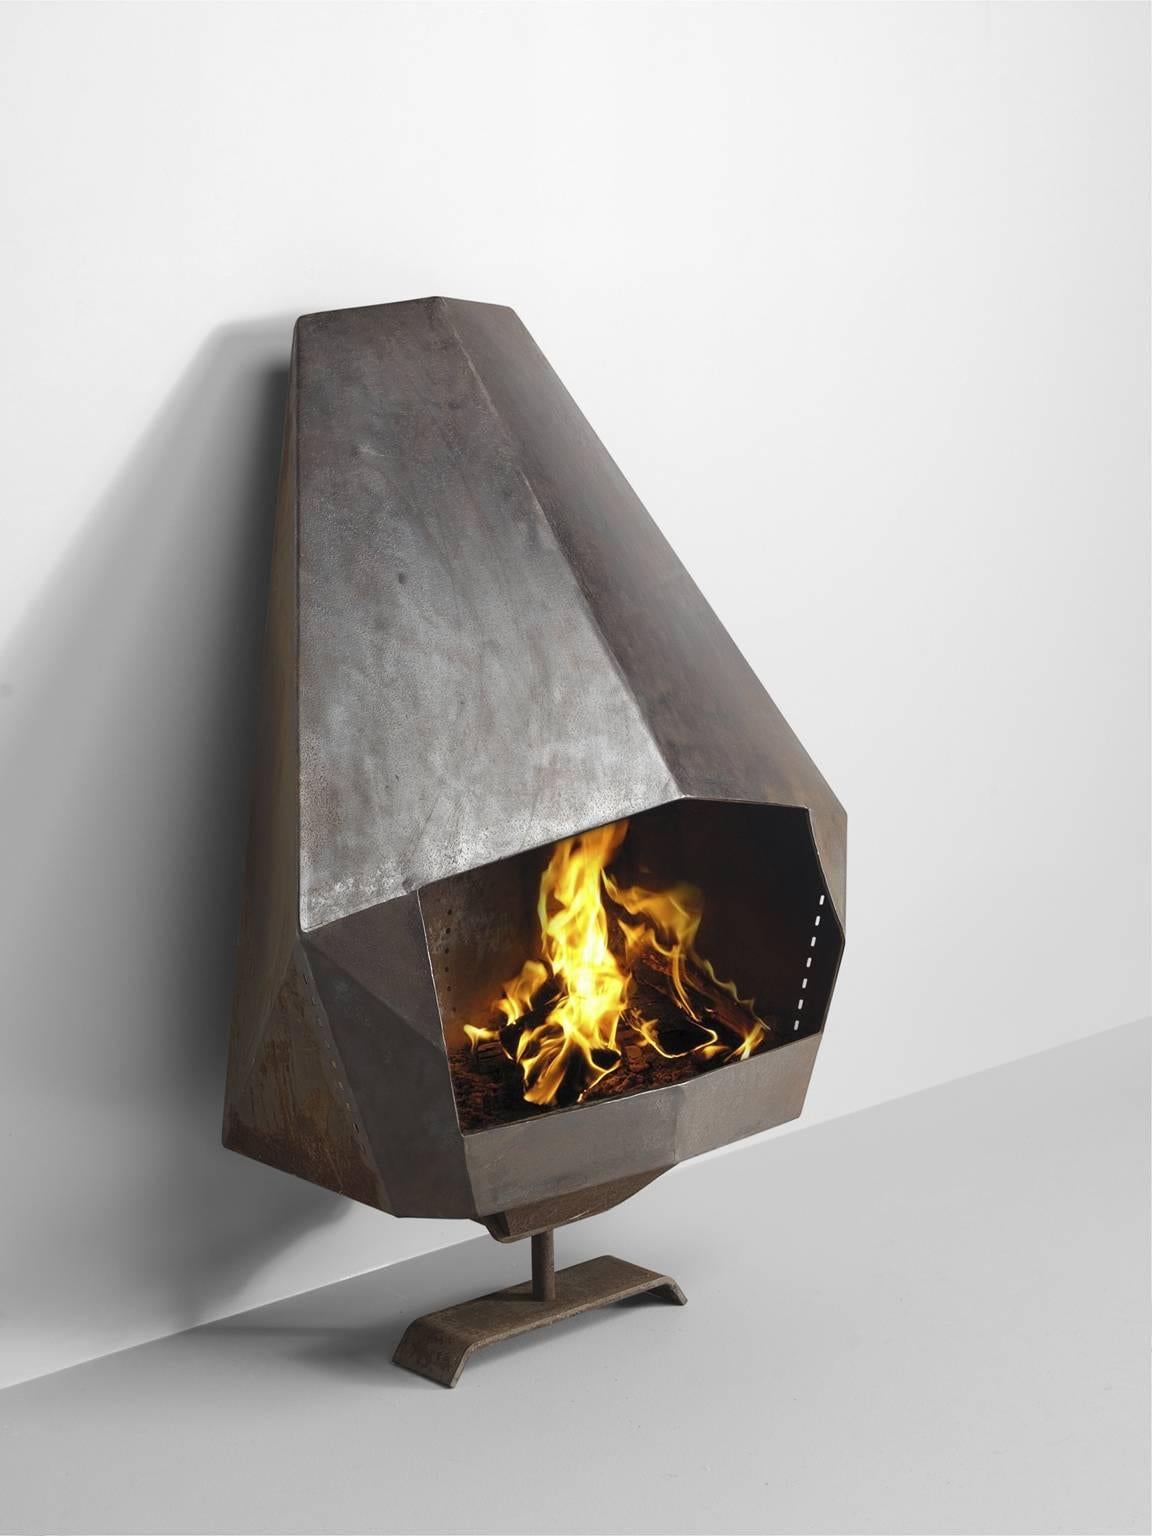 Fire place, steel, Belgium, 1980s.

Wall-mounted robust fire place in black coated steel. The diamond shaped body and pipe with a rectangular hearth. This clear, sharply edged shape of the pipe and hearth make this piece a distinct piece in every